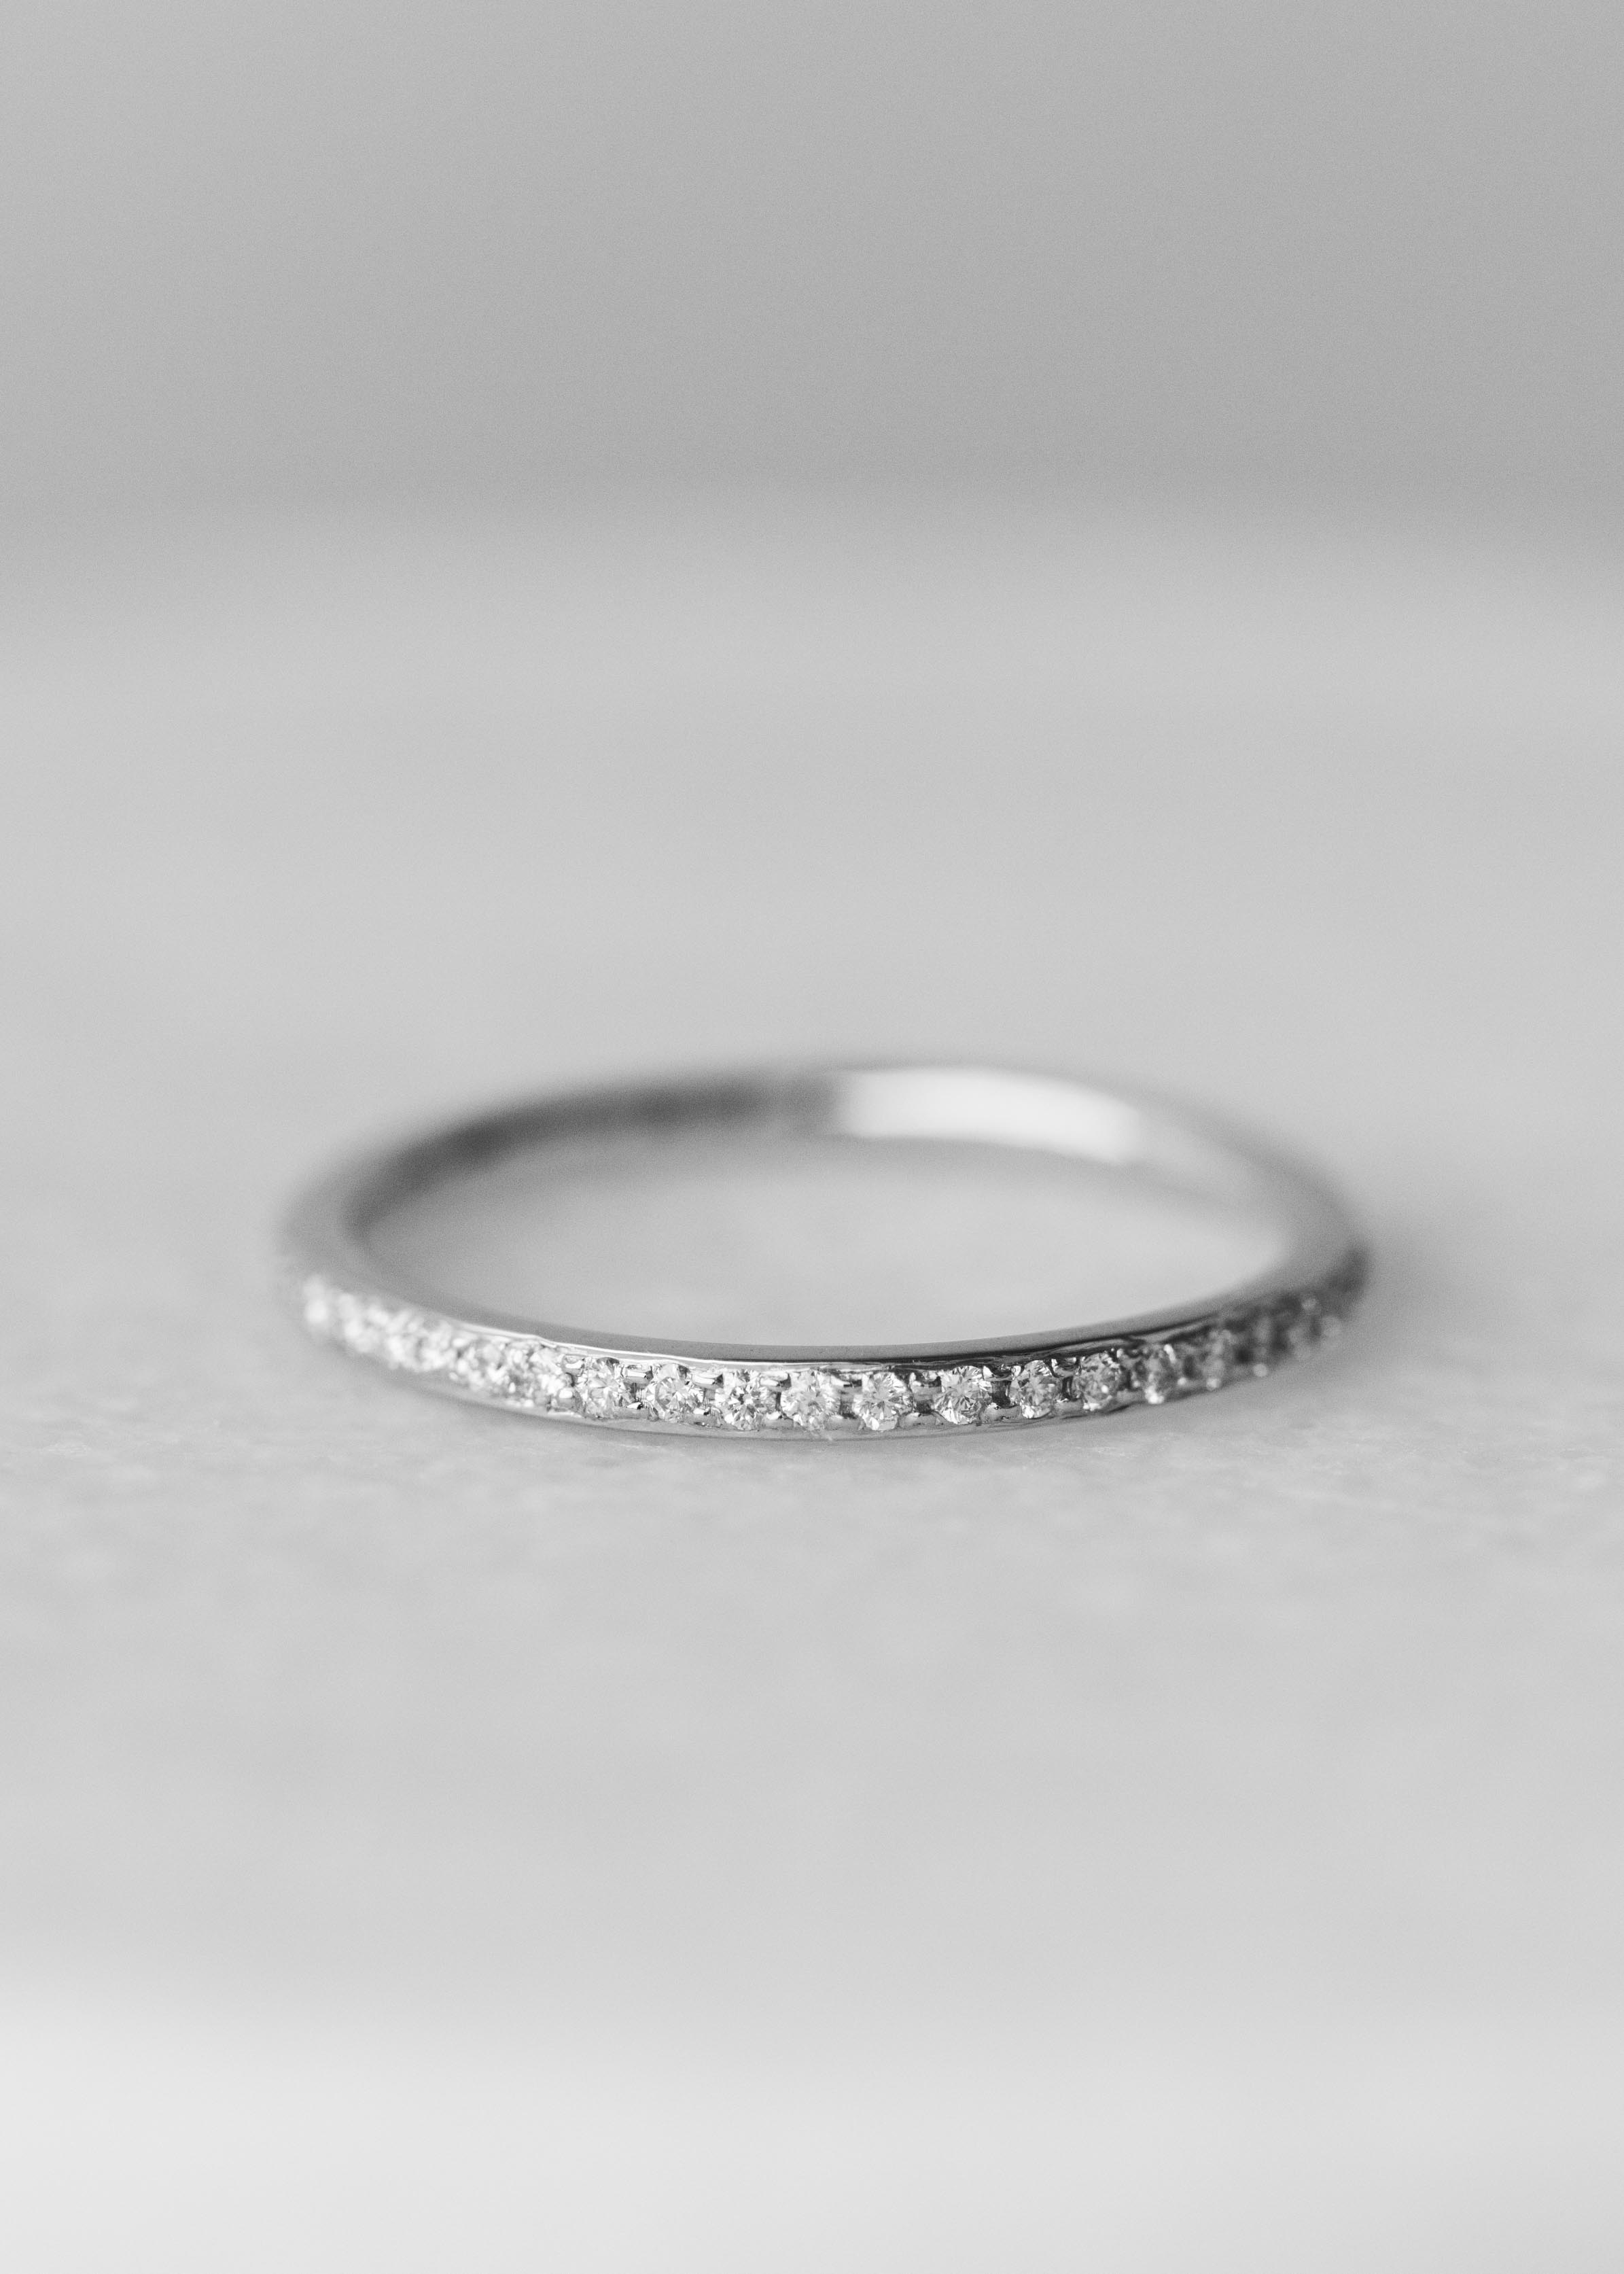 New Bastian Inverun Diamond Dust Ring - Satin Brushed Sterling Silver 7.75  Band - Wilson Brothers Jewelry